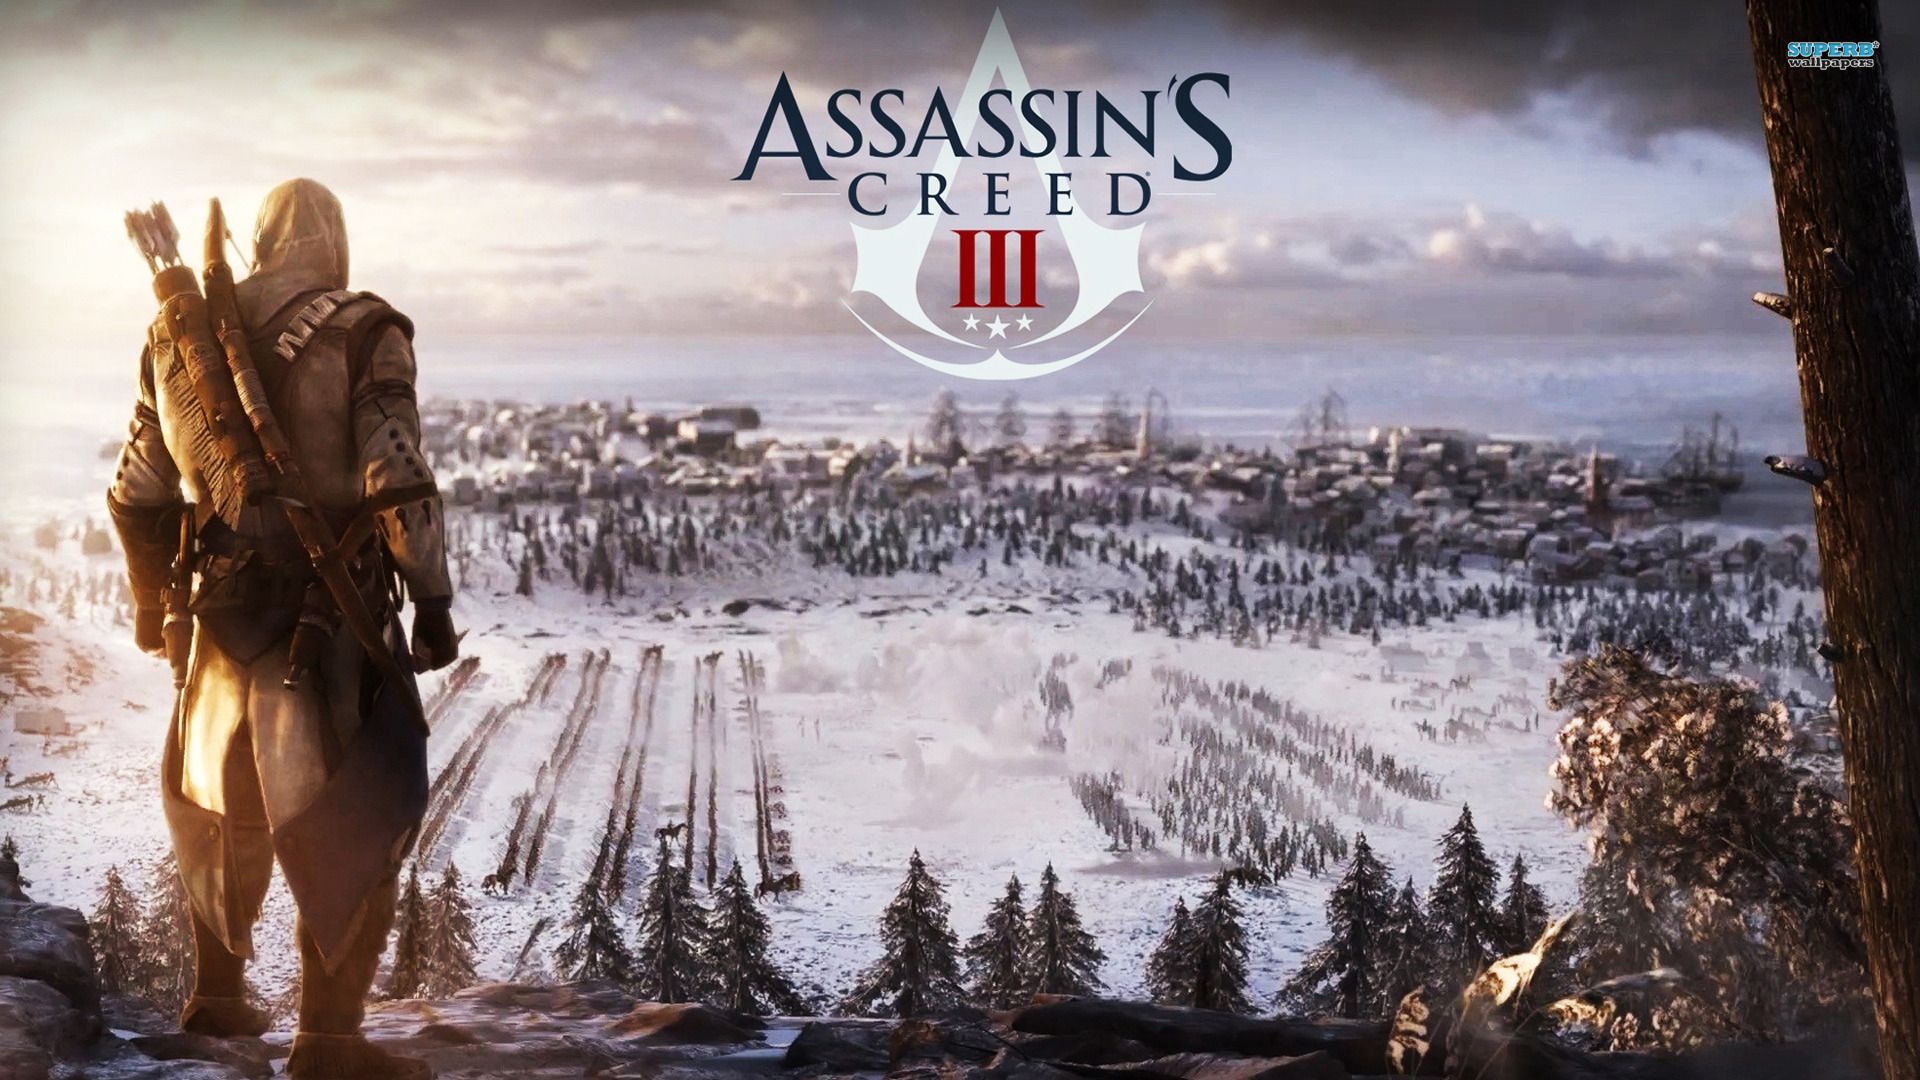 Assassins Creed III wallpaper - Game wallpapers